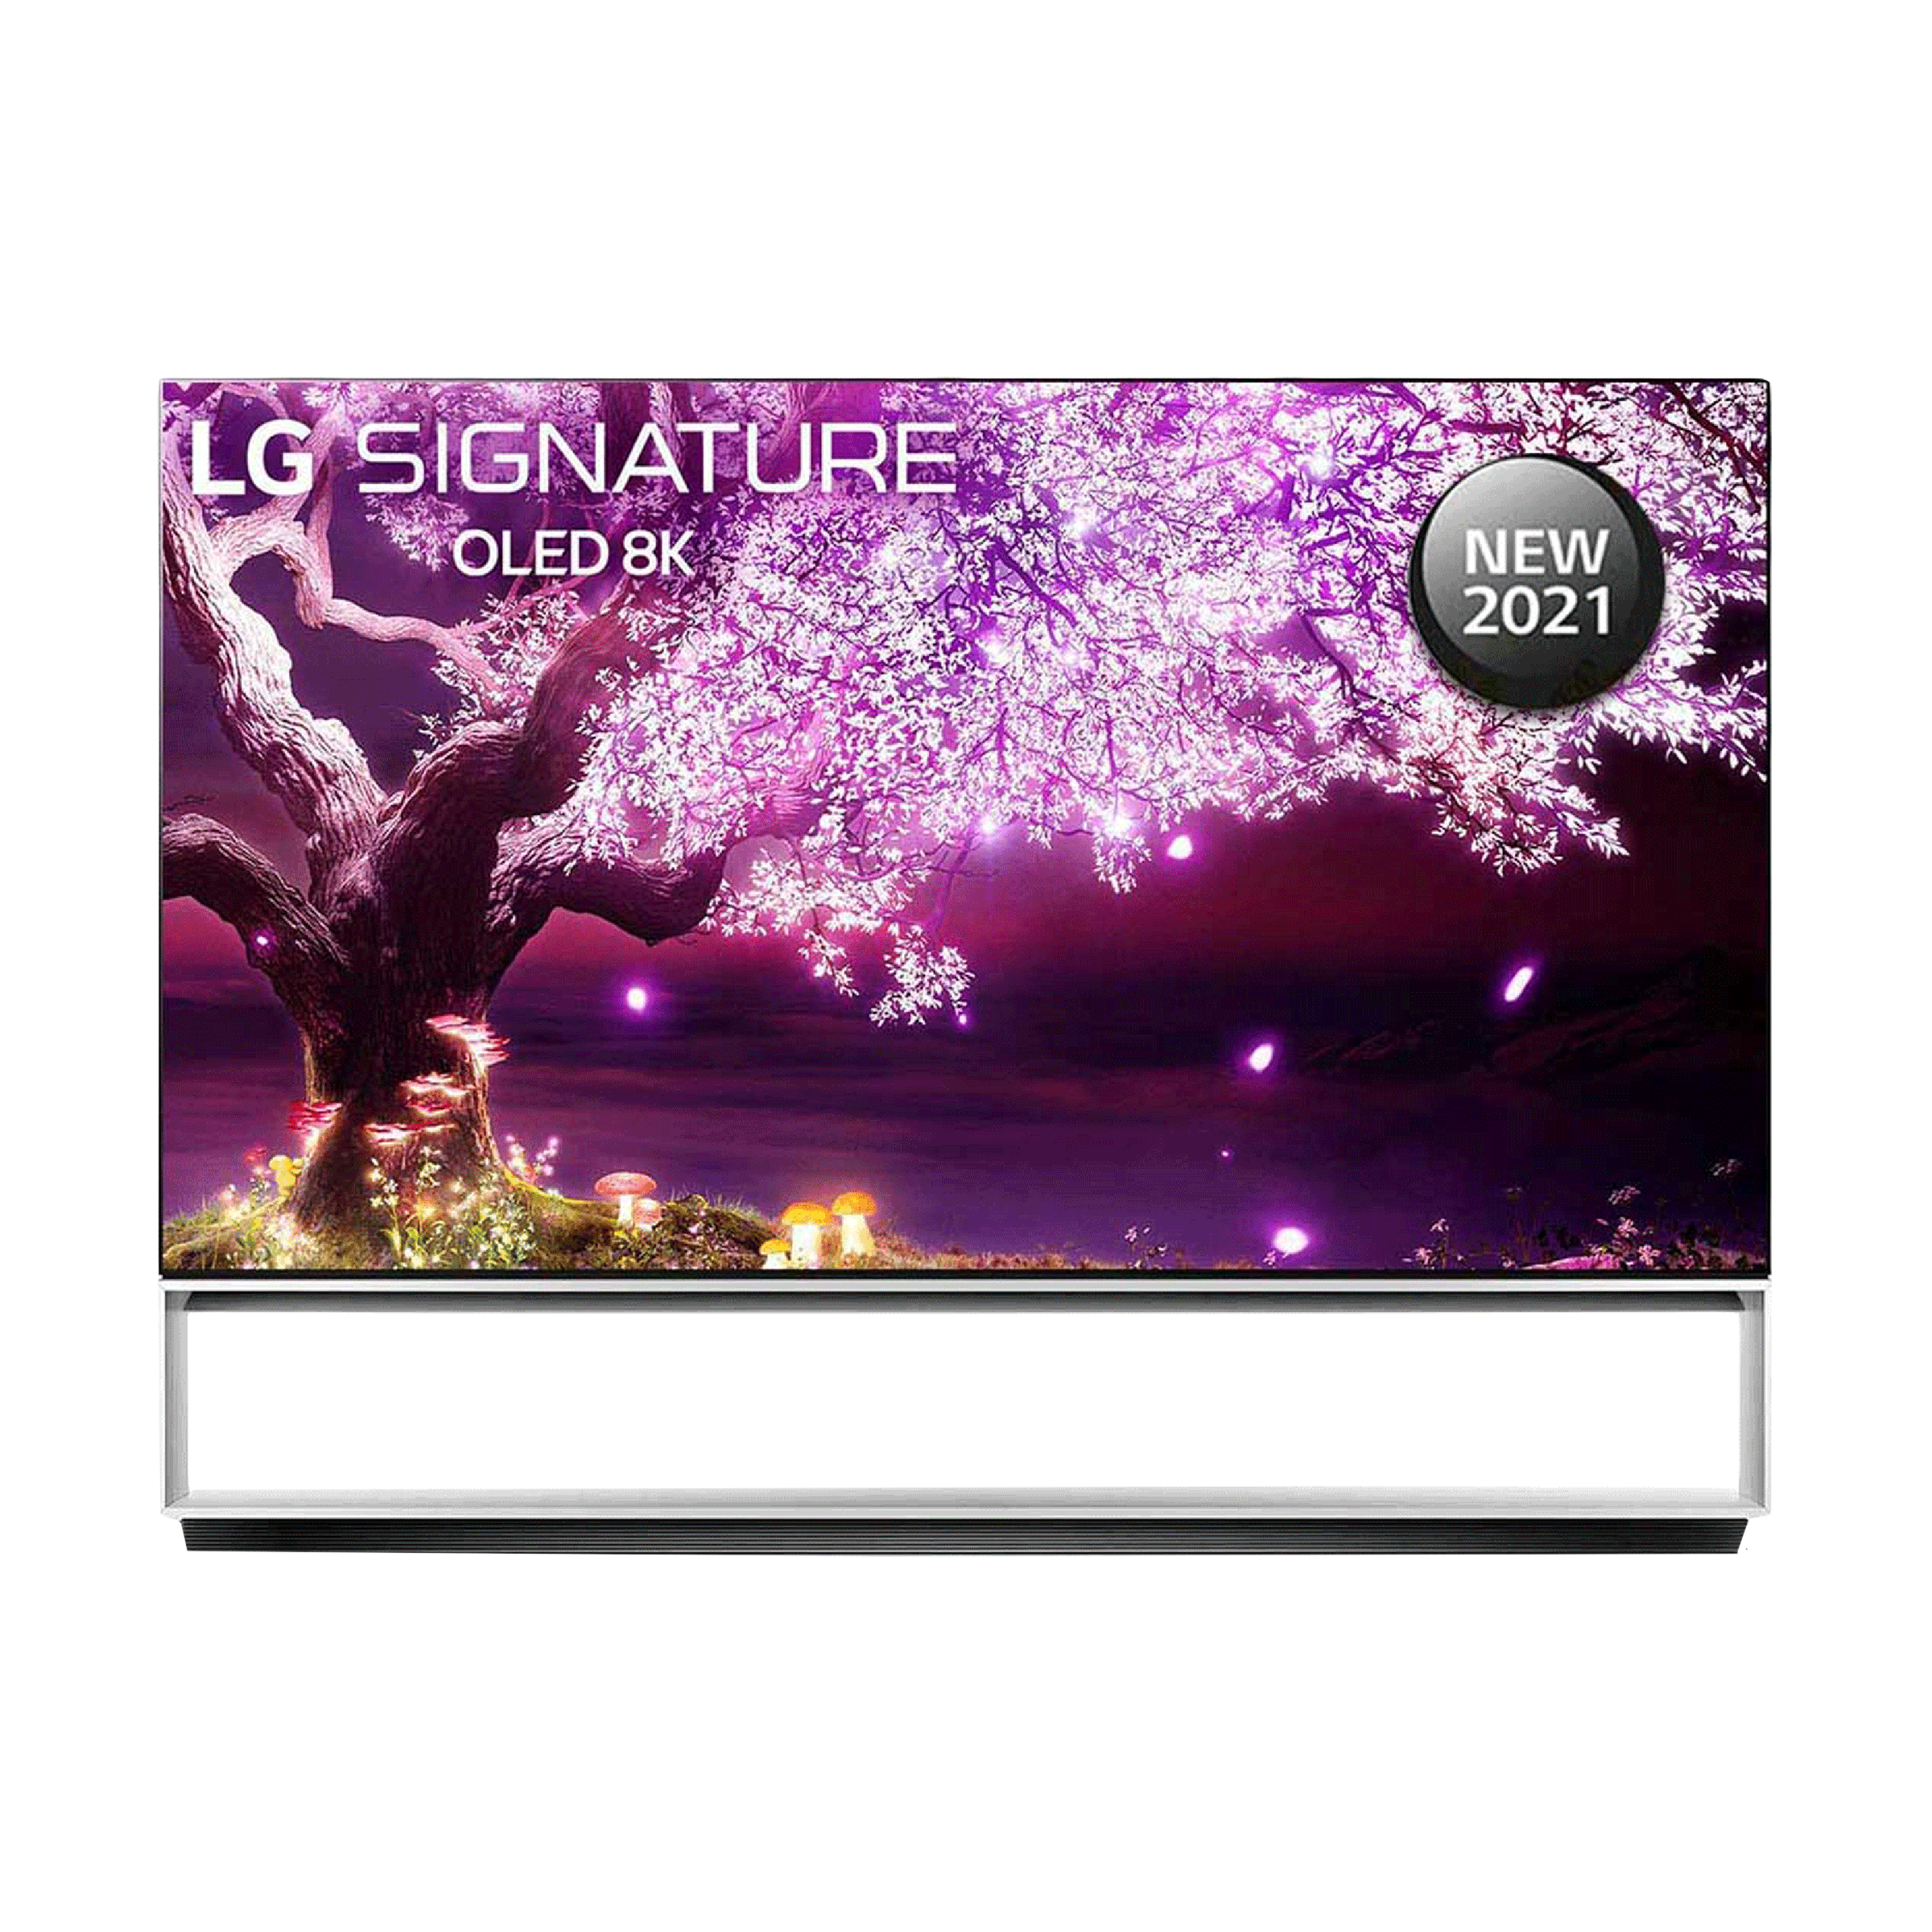 LG Z1 223.52 cm (88 inch) OLED 8K Ultra HD WebOS TV with Alexa Compatibility (2020 model)_1